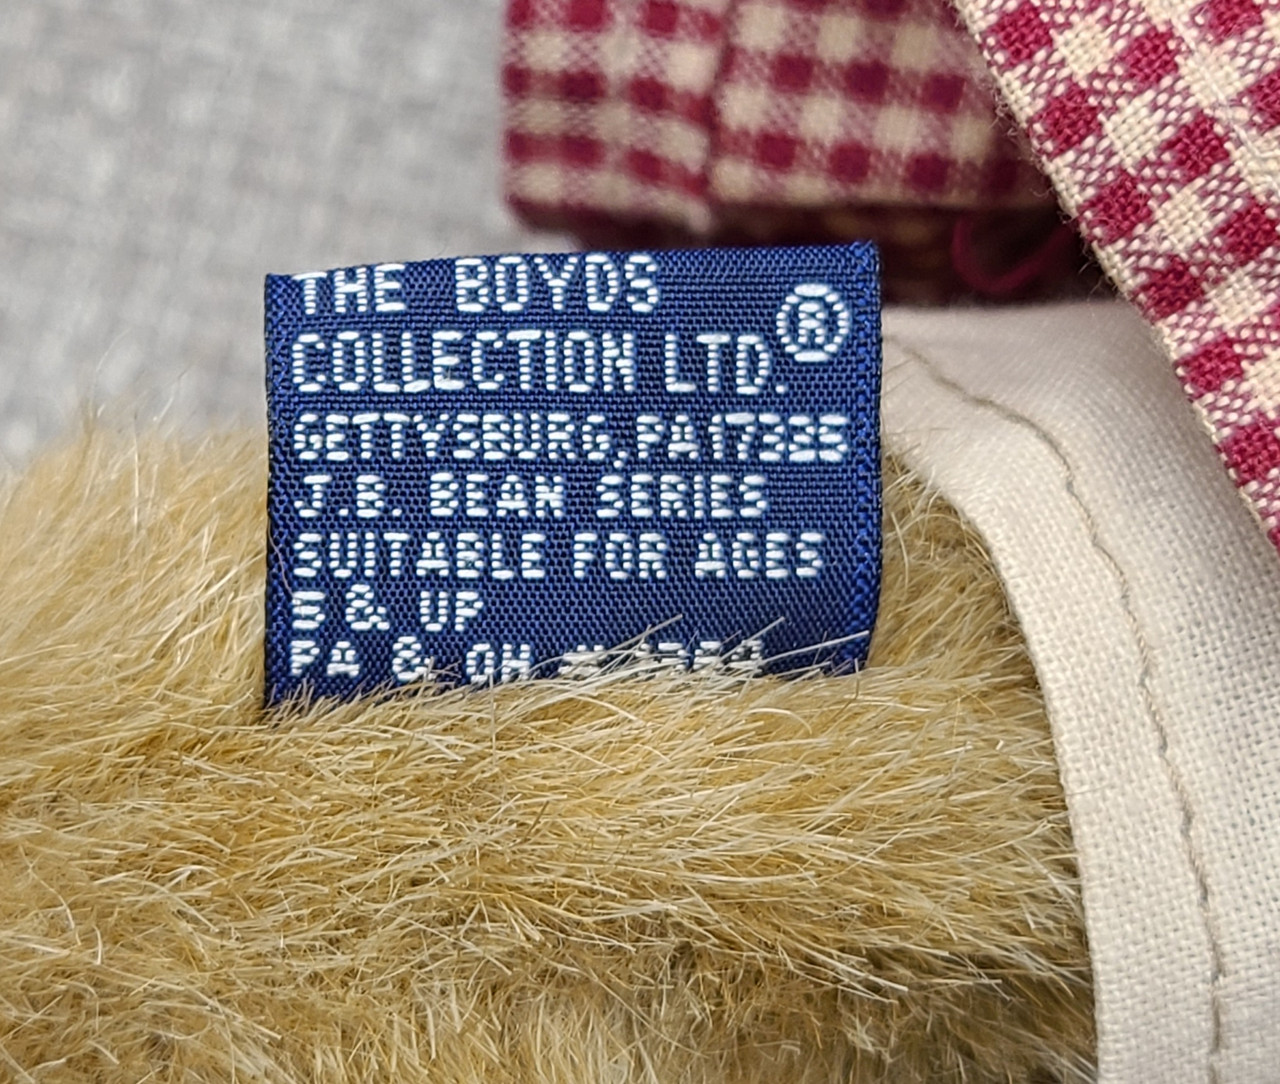 They each have the "The Boyds Collection Ltd." tag